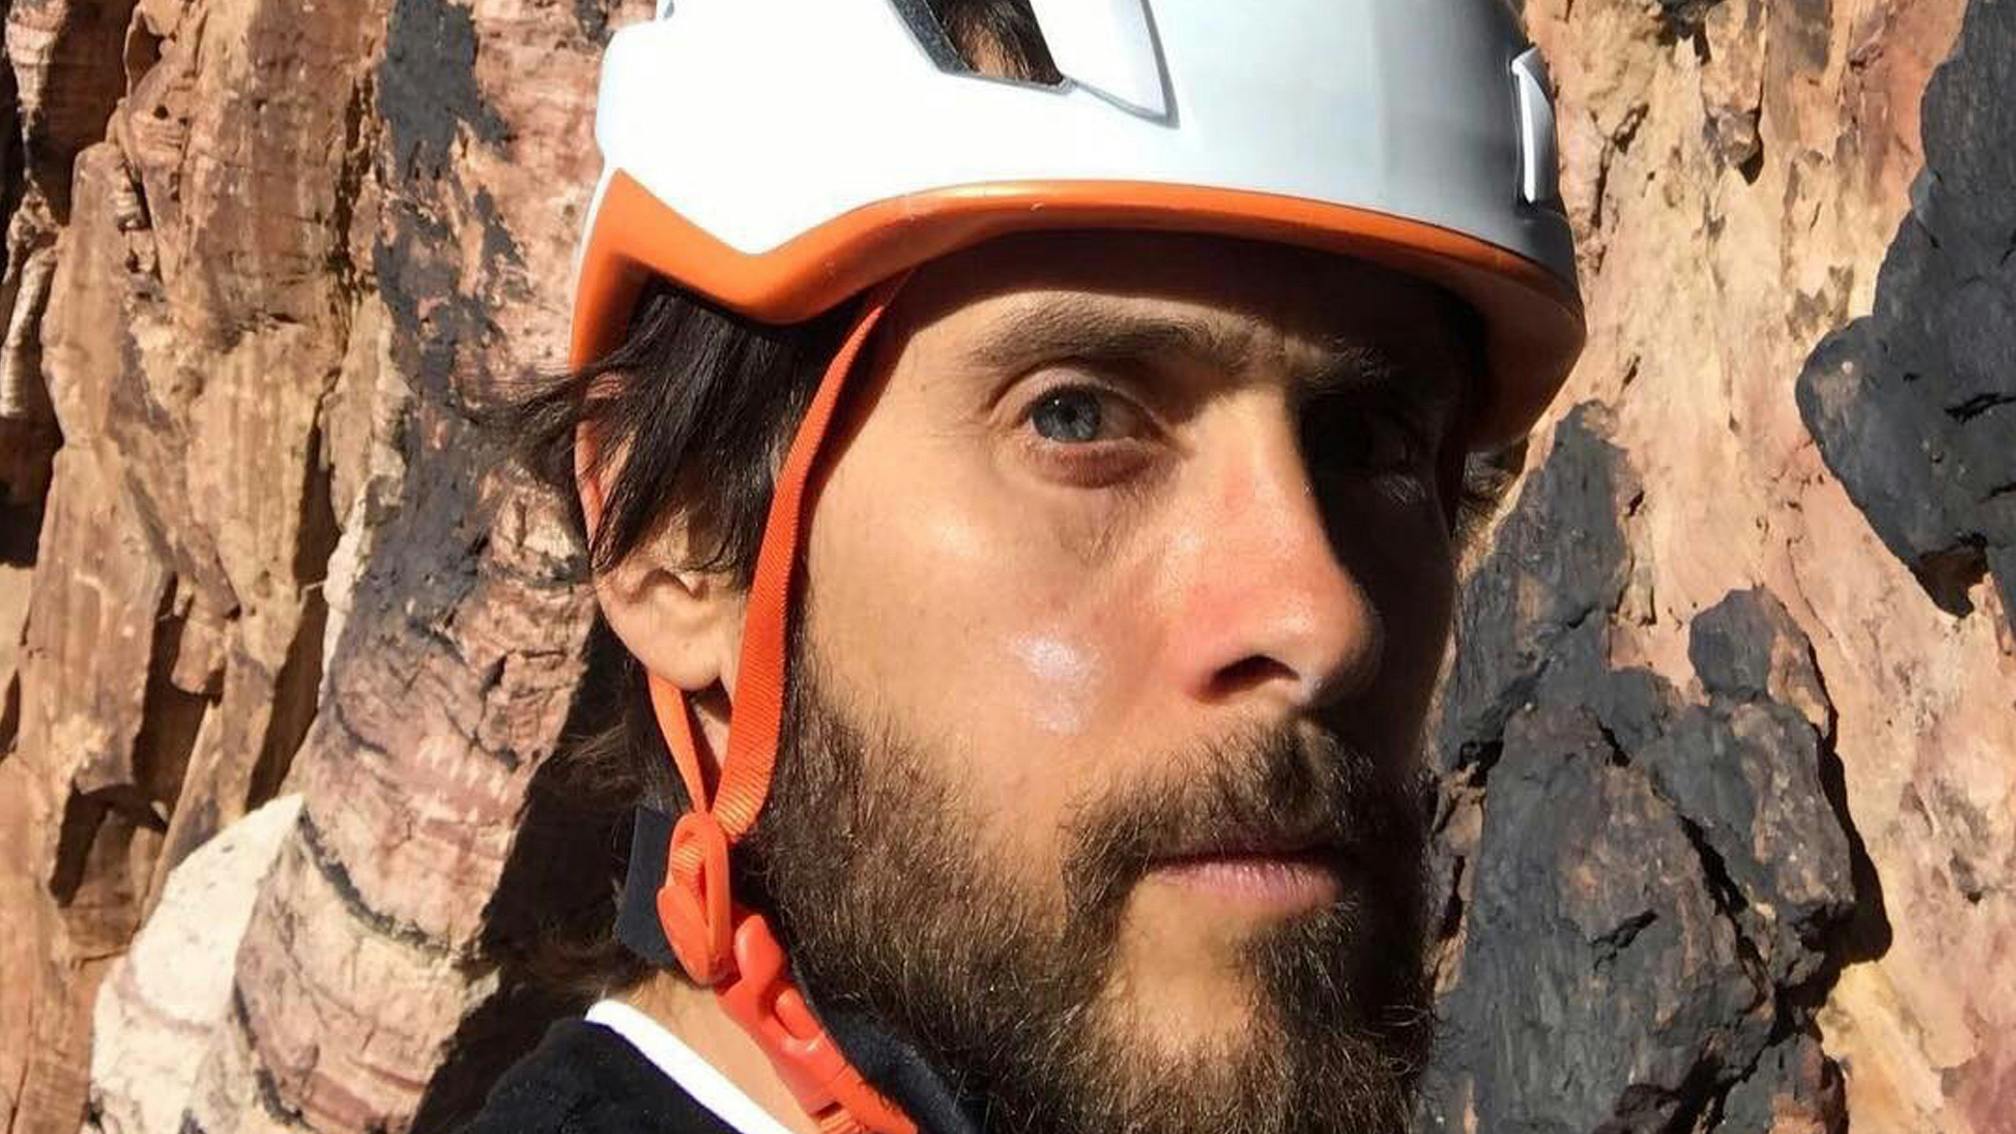 Jared Leto Posts Video Of The Moment He "Nearly Died" Rock Climbing